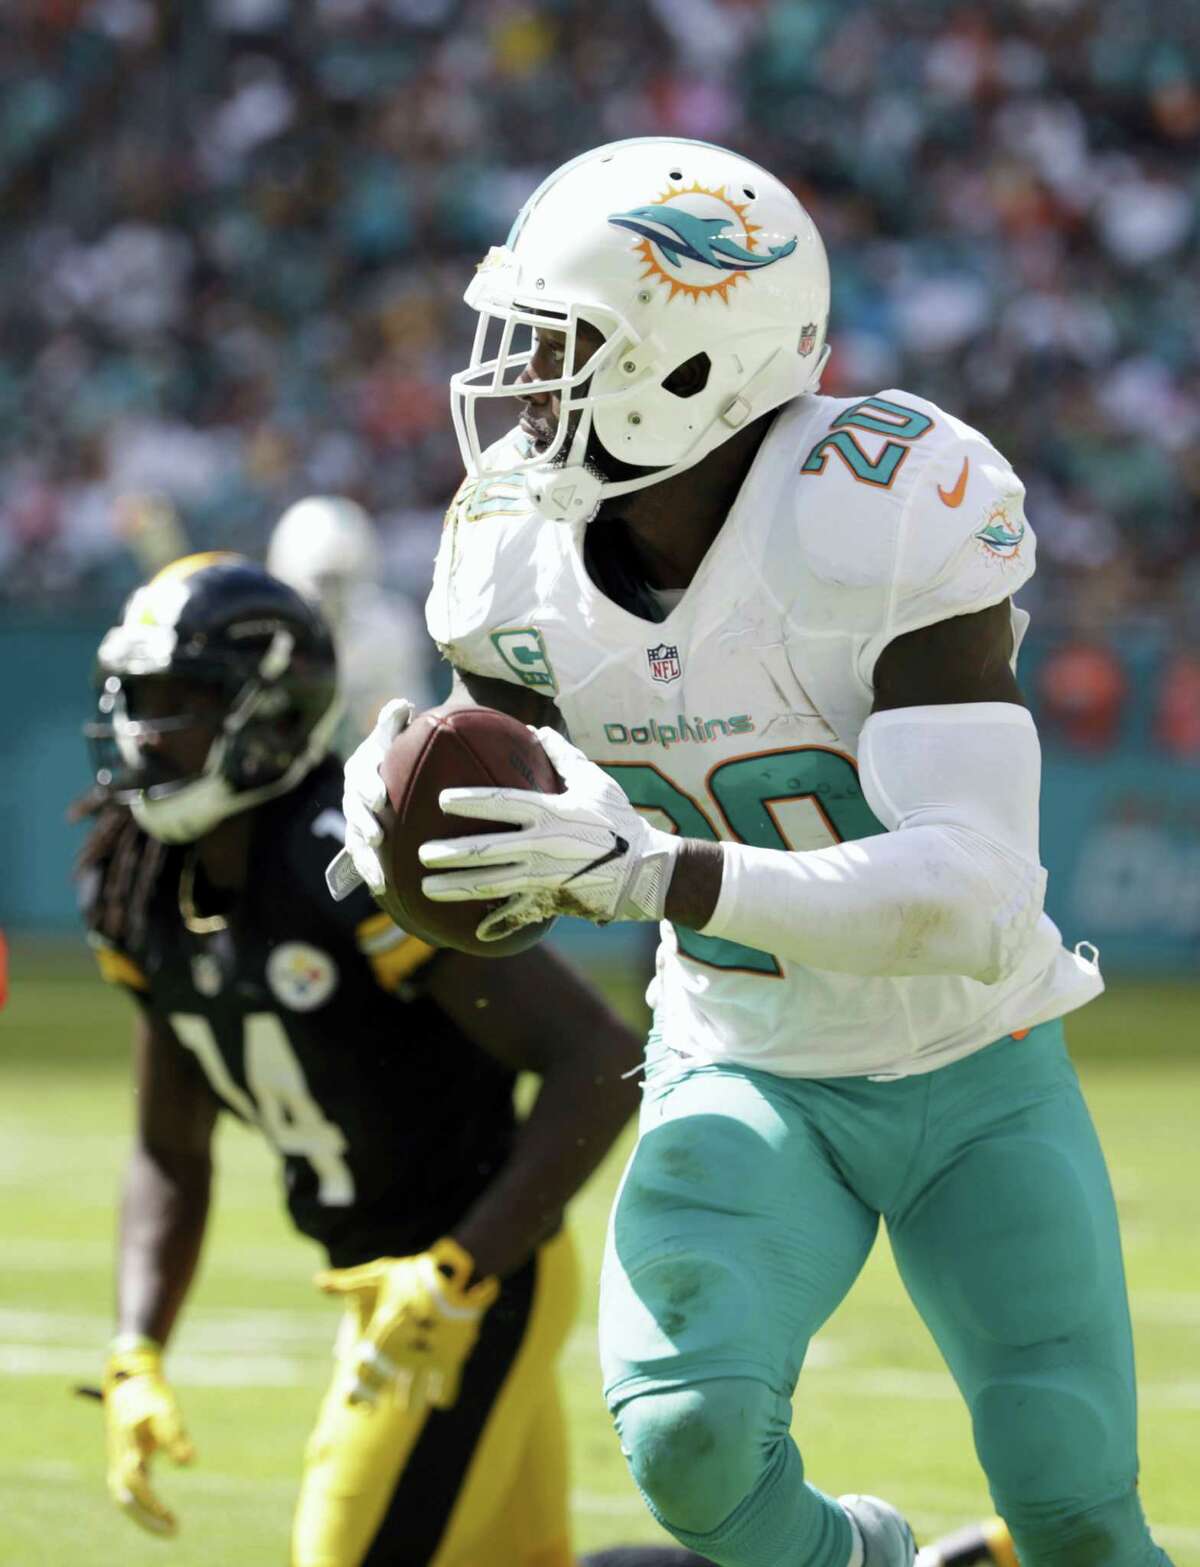 Miami Dolphins free safety Reshad Jones (20) intercepts a ball intended for Pittsburgh Steelers wide receiver Sammie Coates (14), during the first half of an NFL football game on Oct. 16, 2016 in Miami Gardens, Fla.